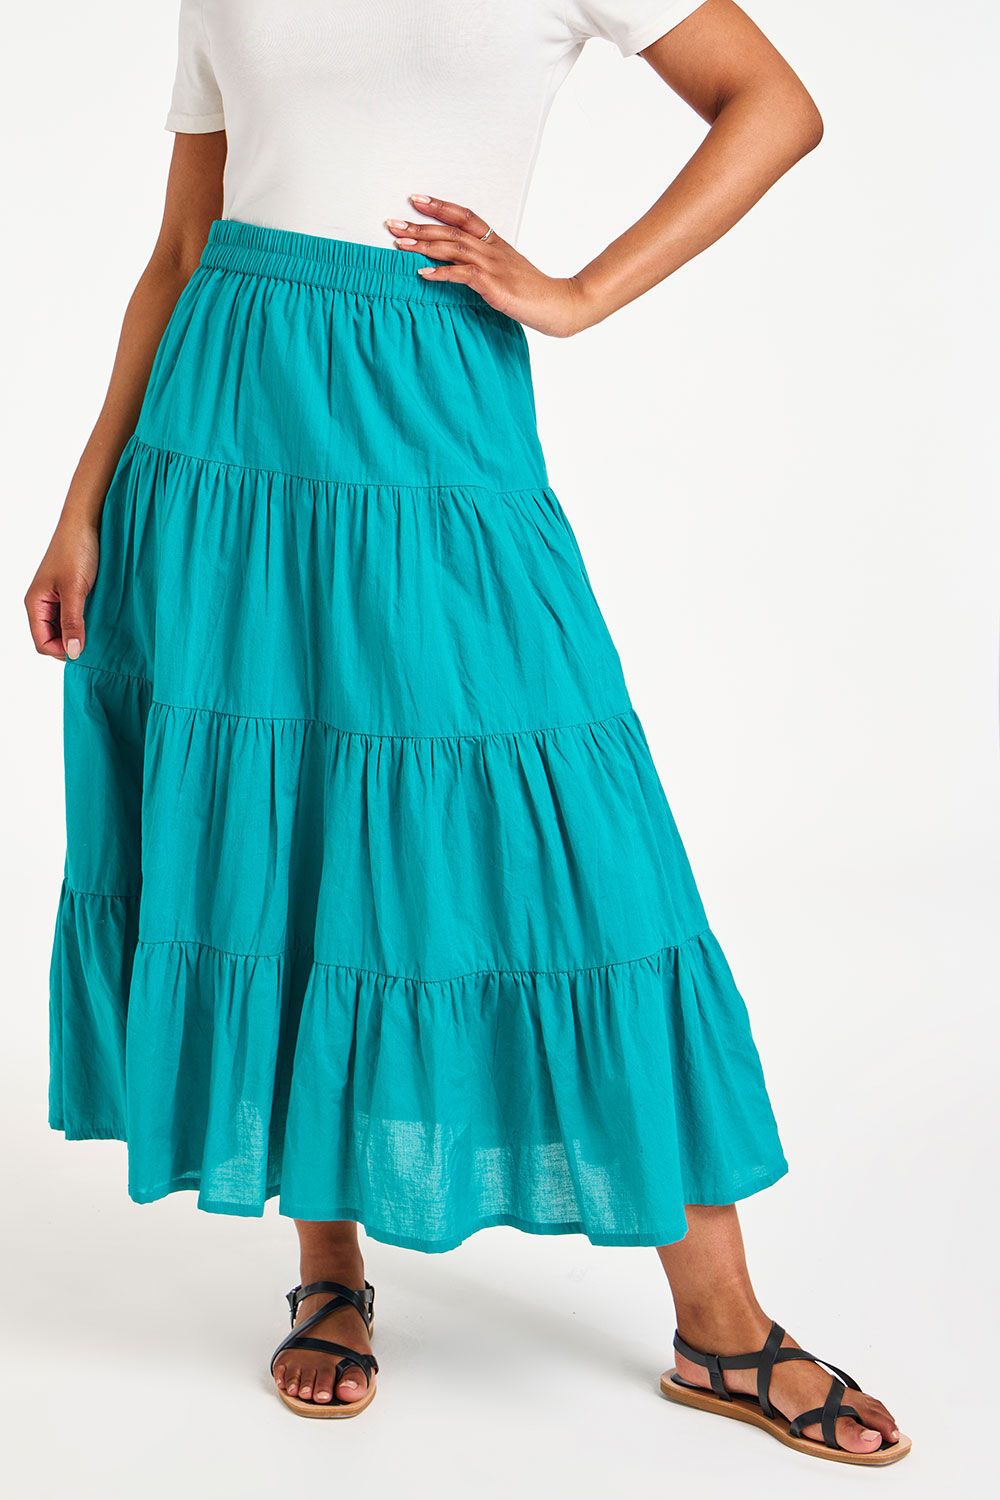 Bonmarche Turquoise Plain Tiered Cotton Elasticated Skirt, Size: 18